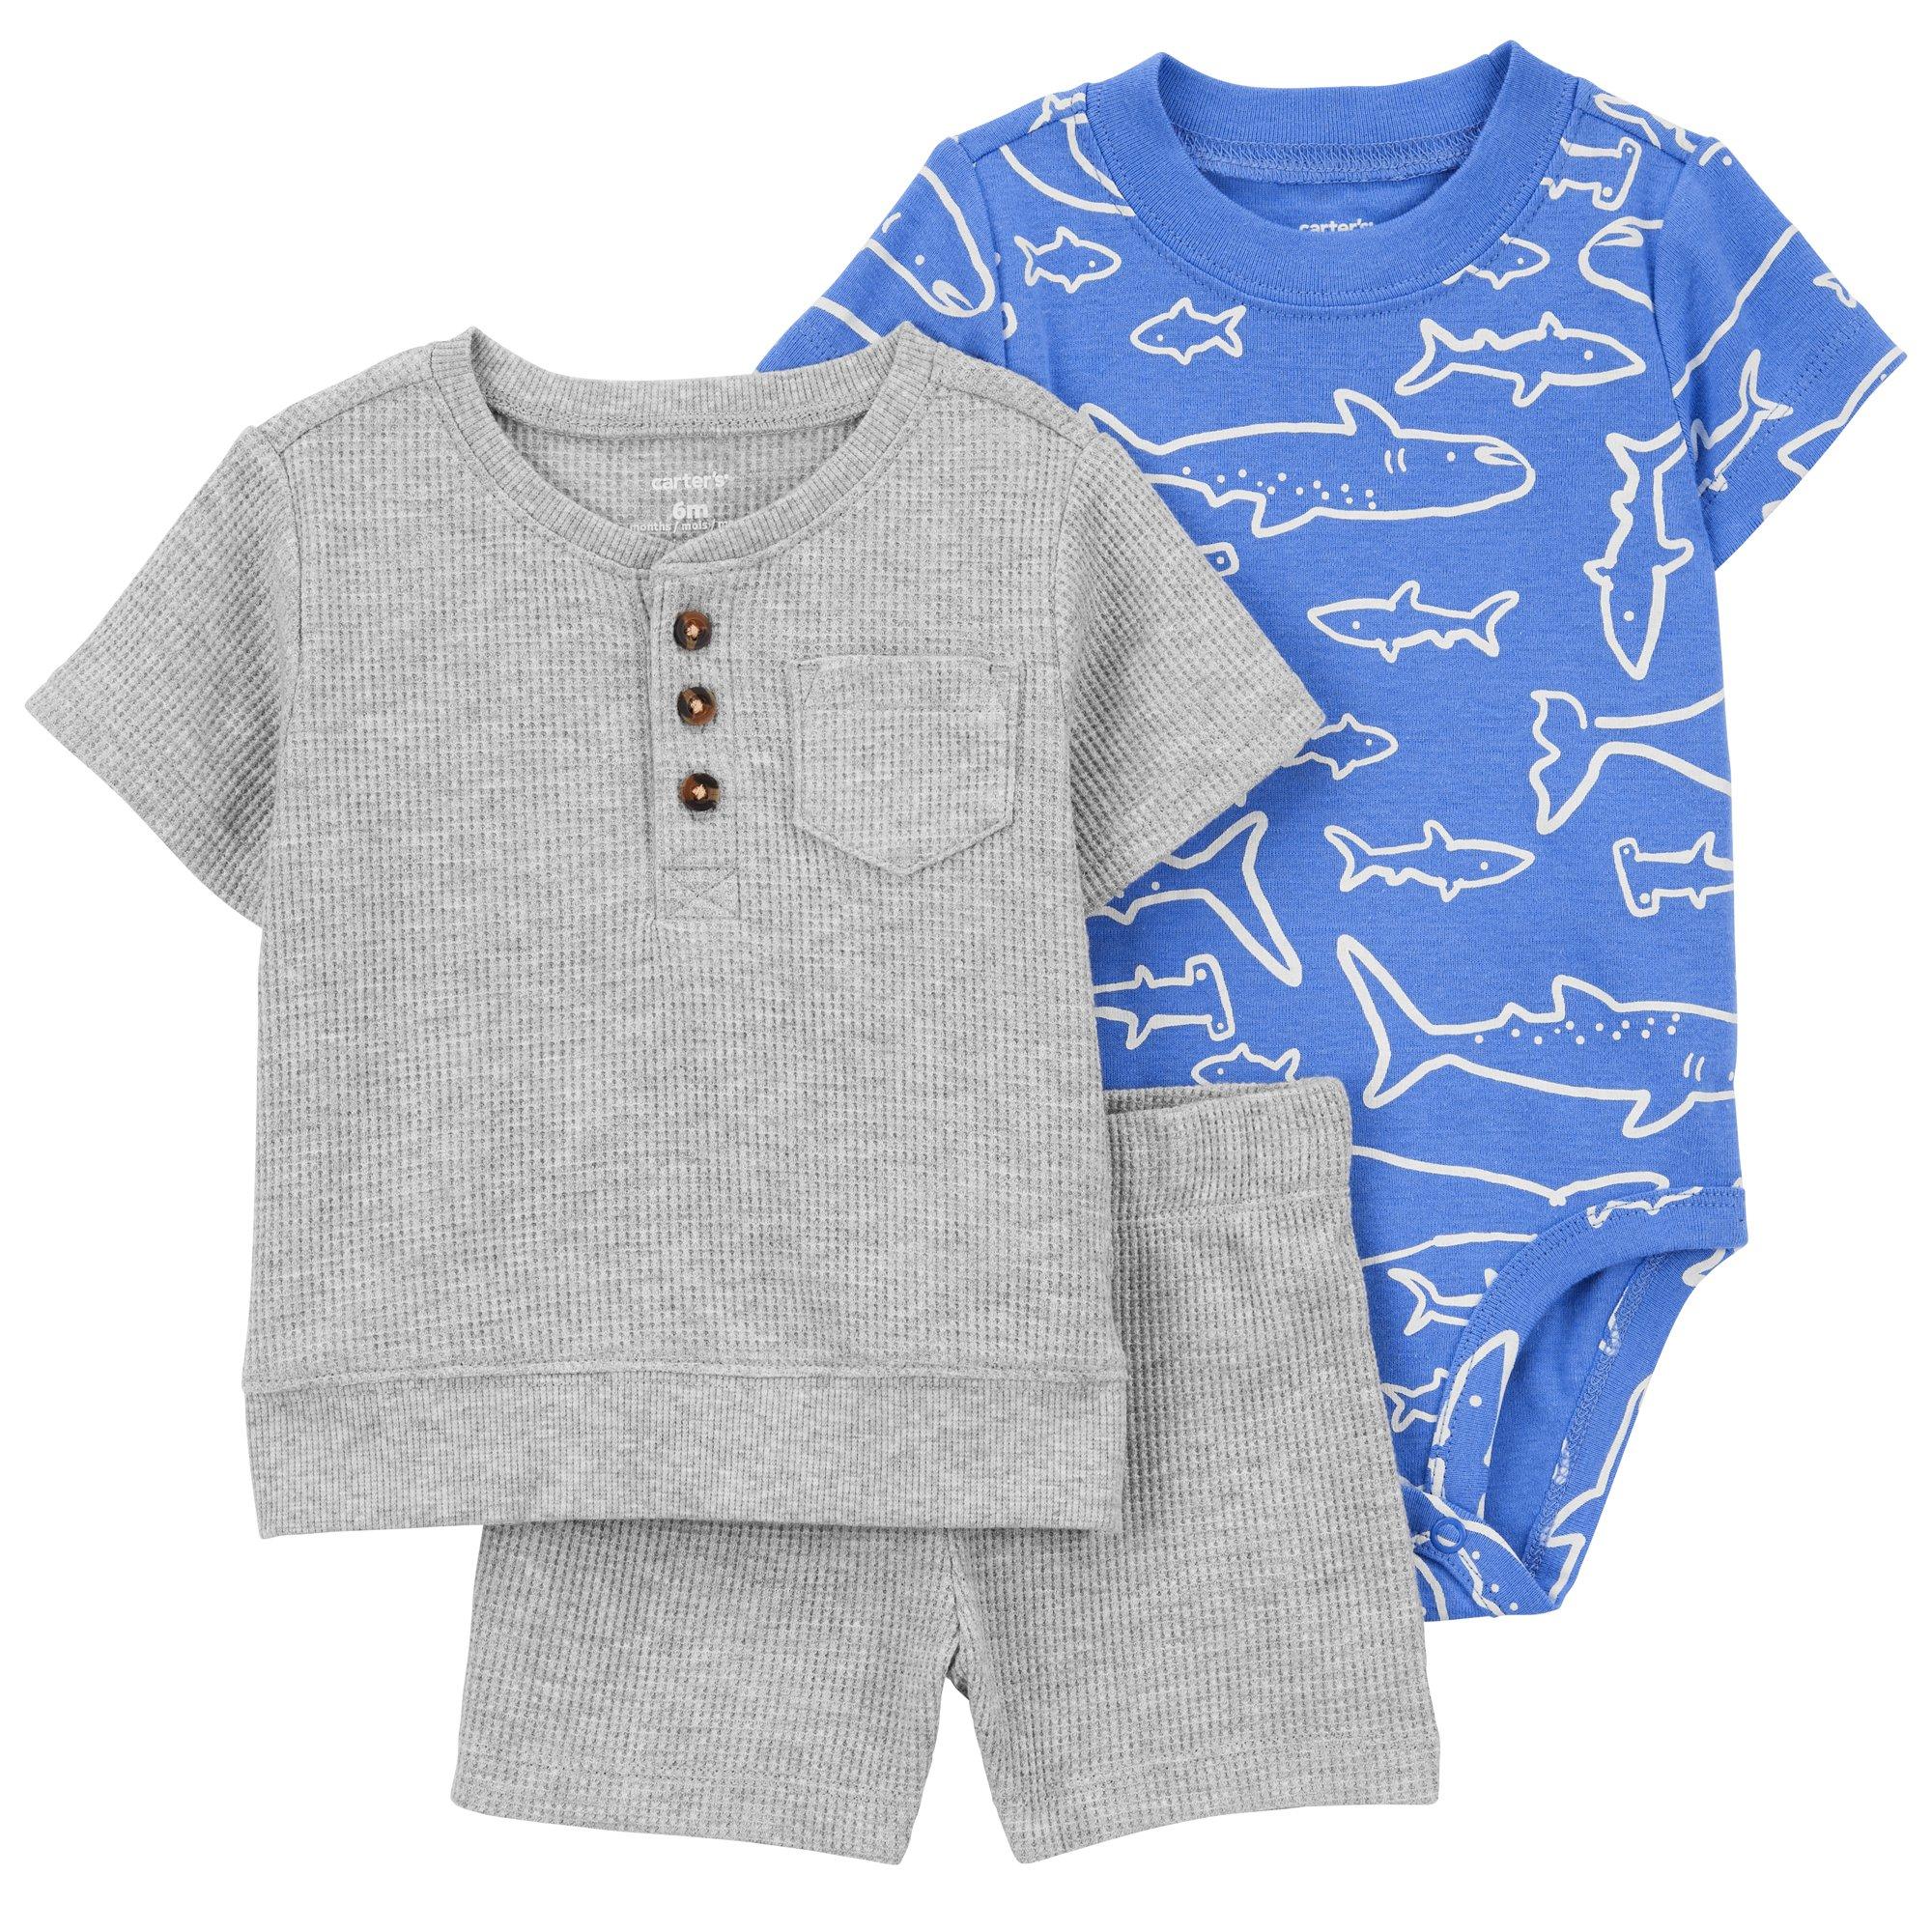 Carters Baby Boys 3-pc. Whale Creeper + Short